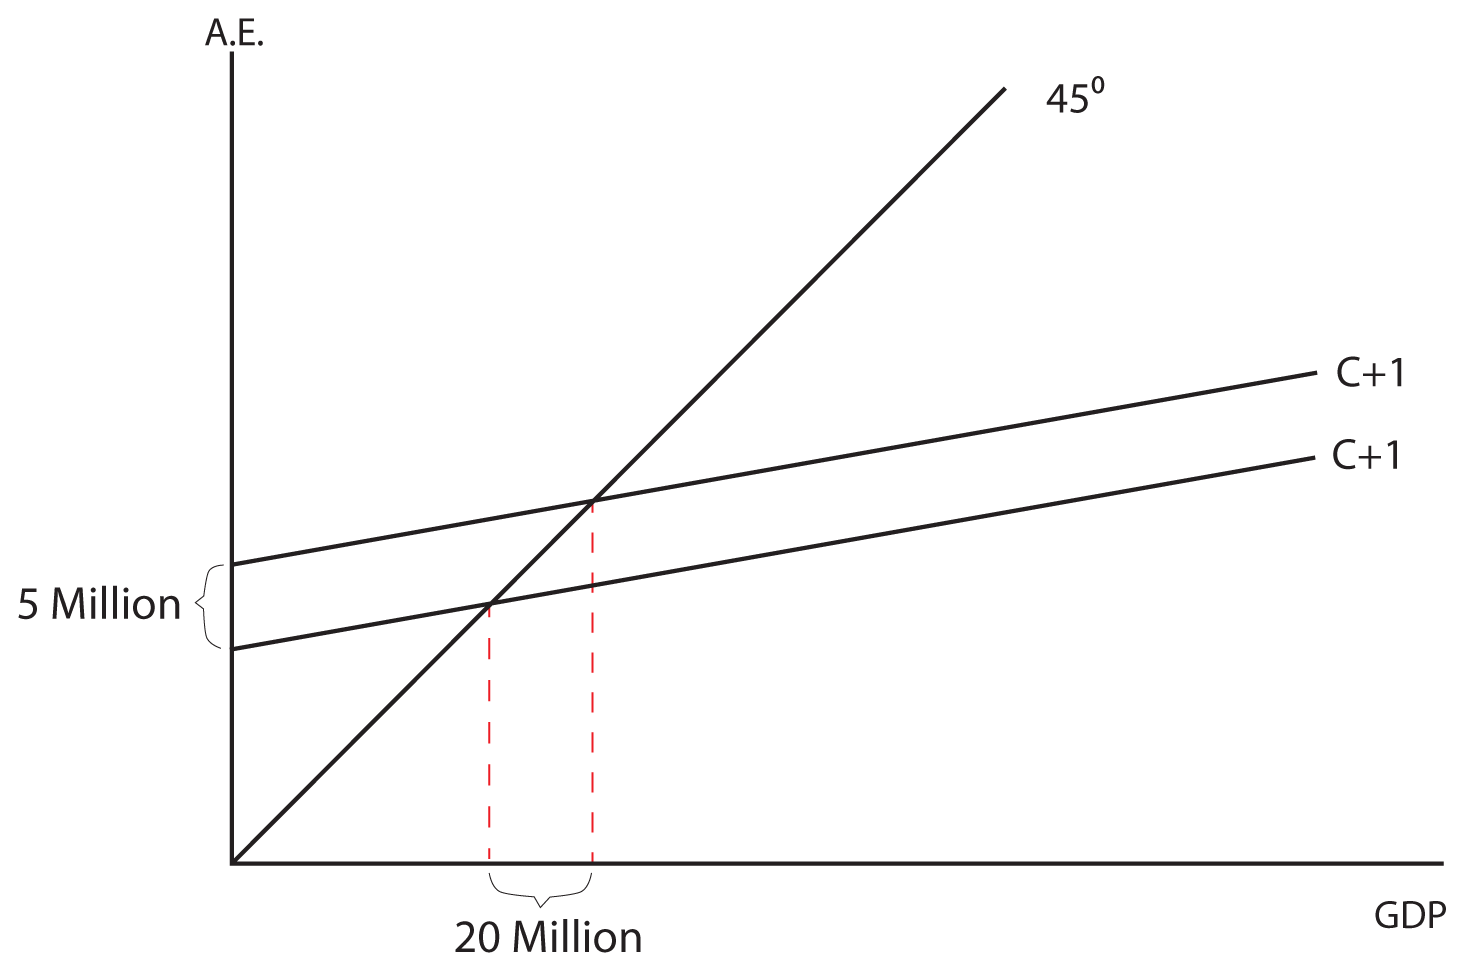 Image 7.04: The image shows a graph. The y axis is labeled A.E. The x axis is labeled GDP. There is a 45 degree line drawn from the origin. There are two lines with a slope of C + 1 drawn from the y axis, one five million units higher than the other on the x axis. Vertical lines are drawn from the intersection points of the two C + 1 lines and the 45 degree line. The difference between the the two intersection points on the x axis is 20 million.